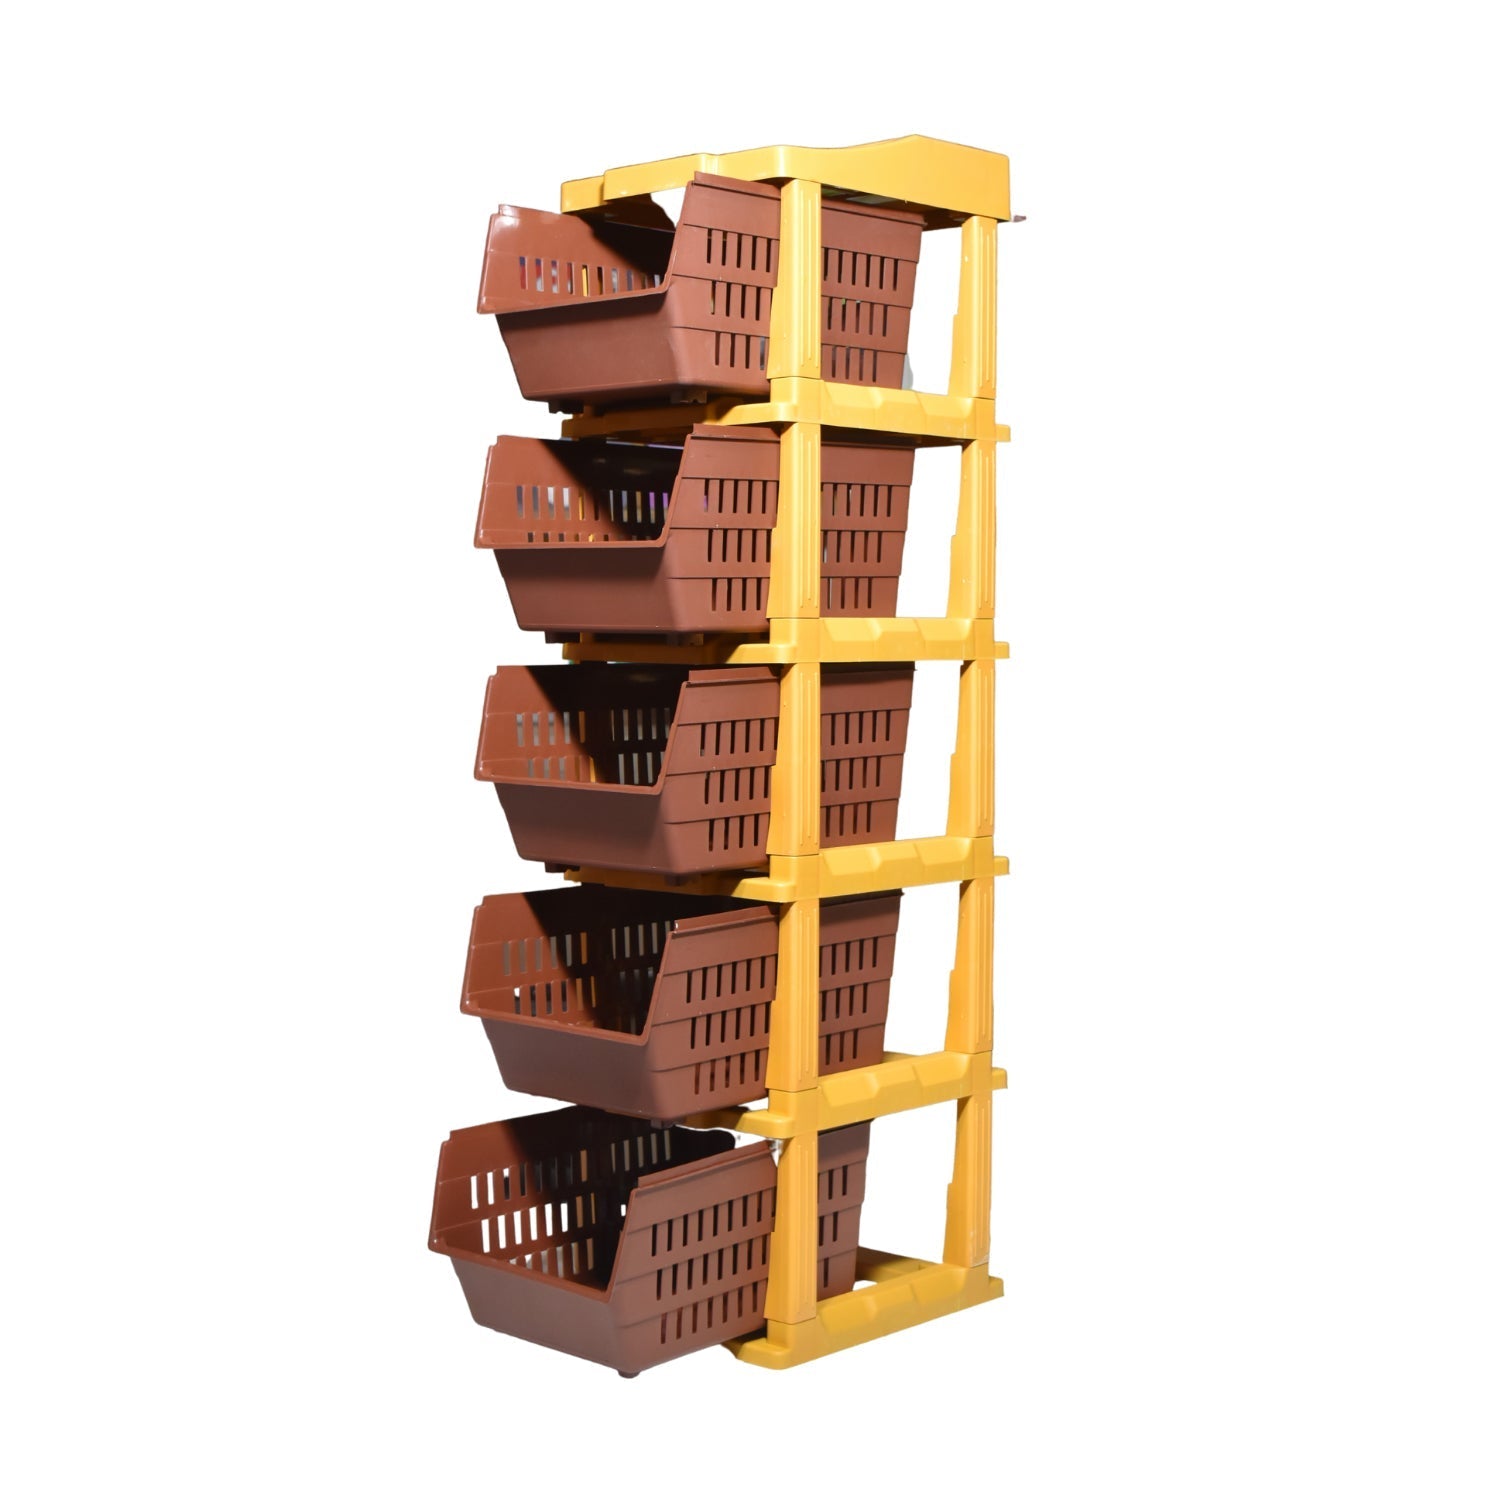 1151B 5 Tier Modular Drawer Used for storing different-different types of equipments and stuffs.